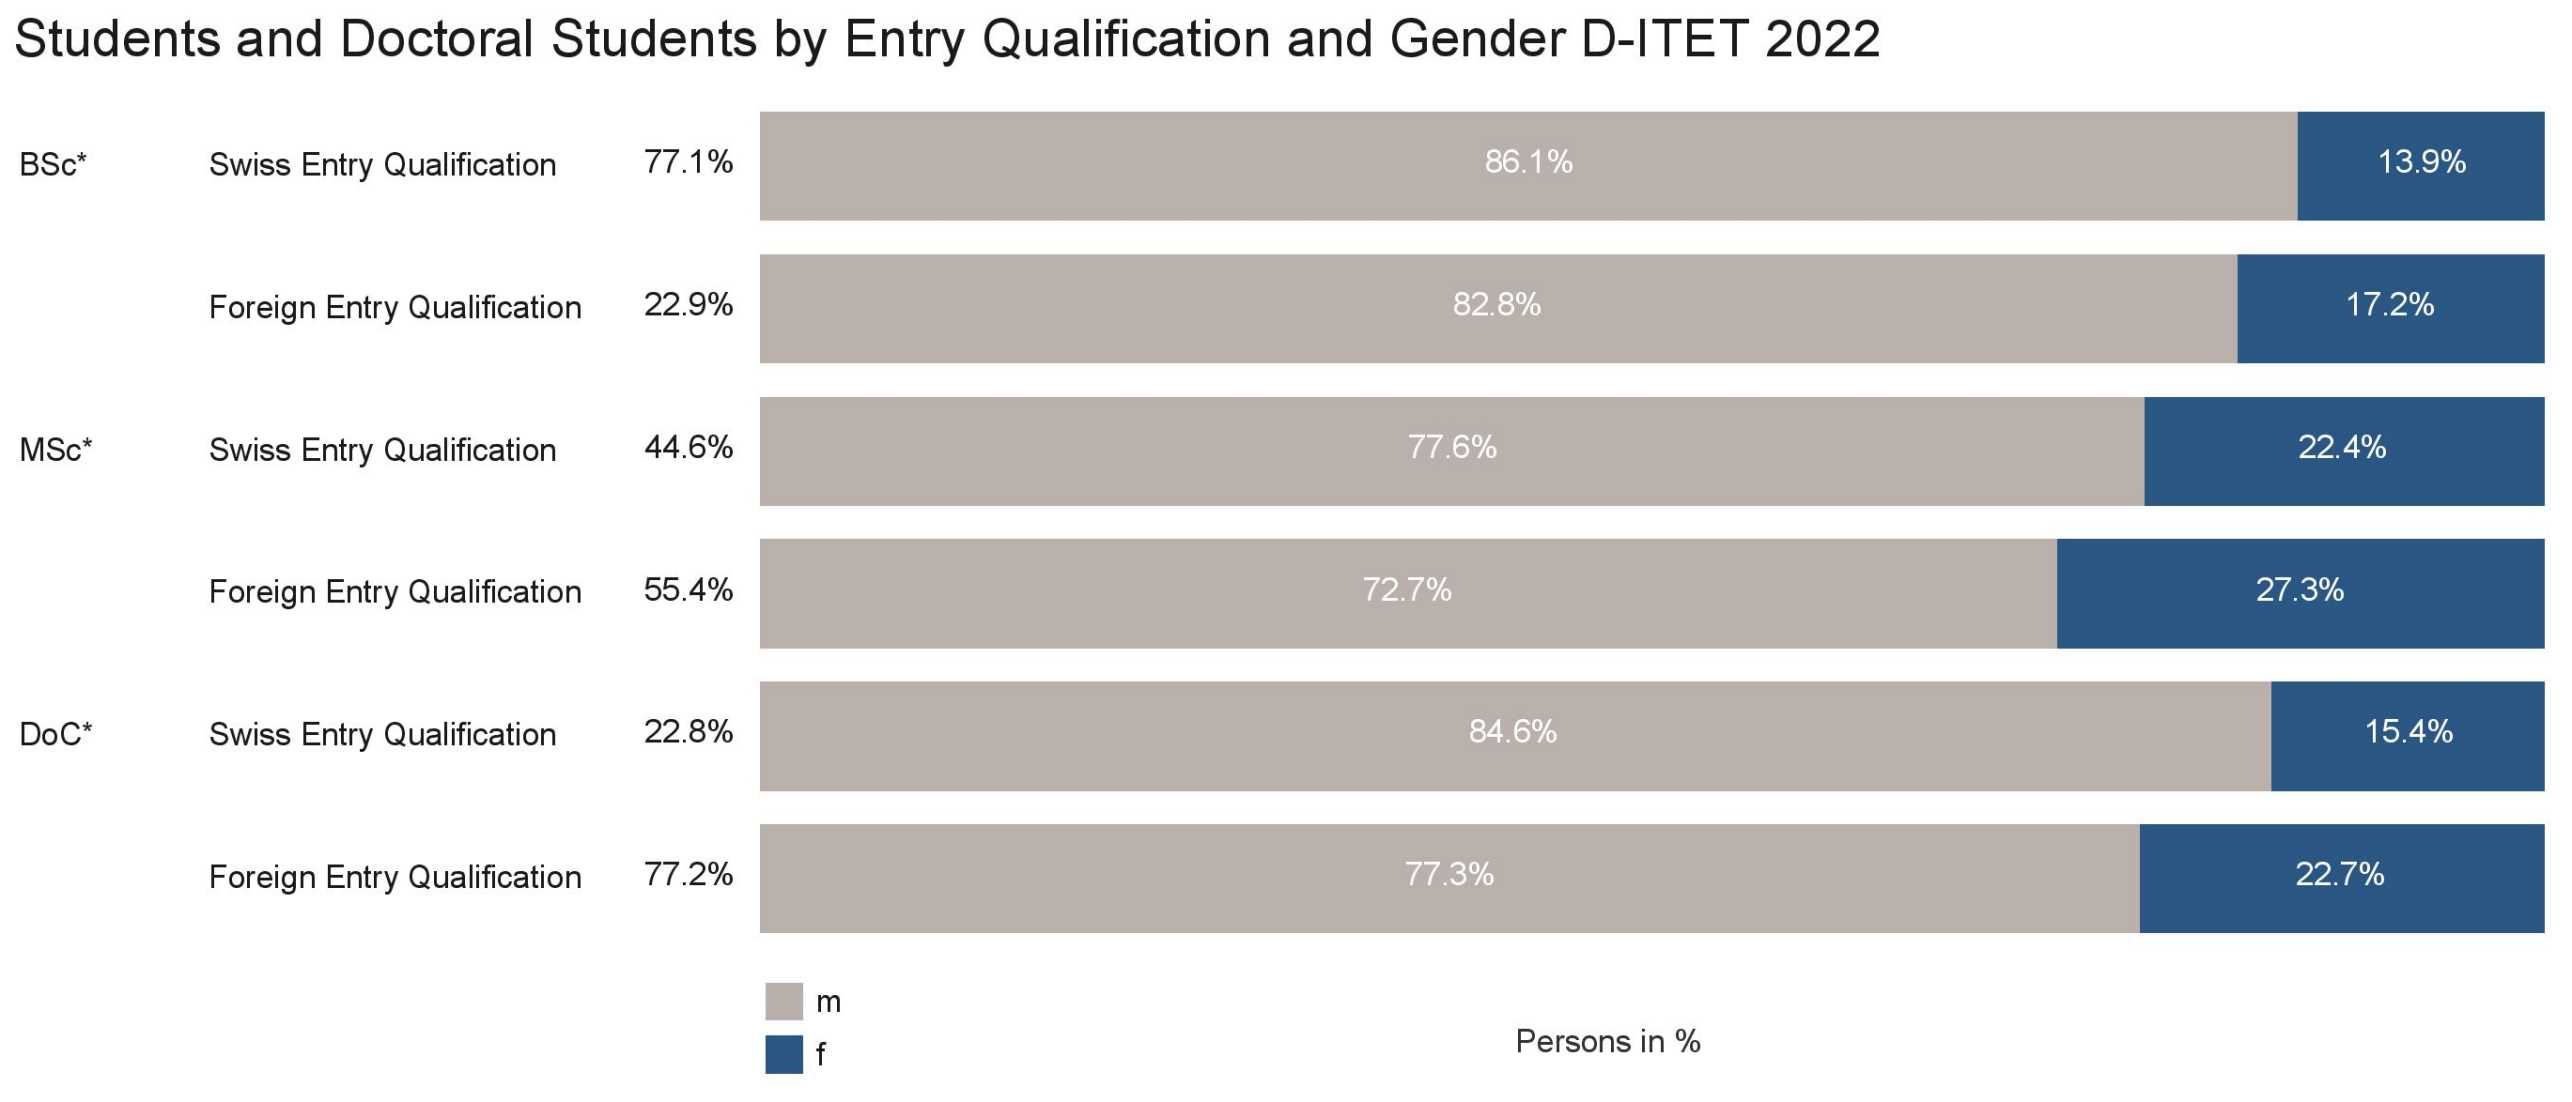 Enlarged view: Students and Doctoral Students by Entry Qualification and Gender D-ITET 2022